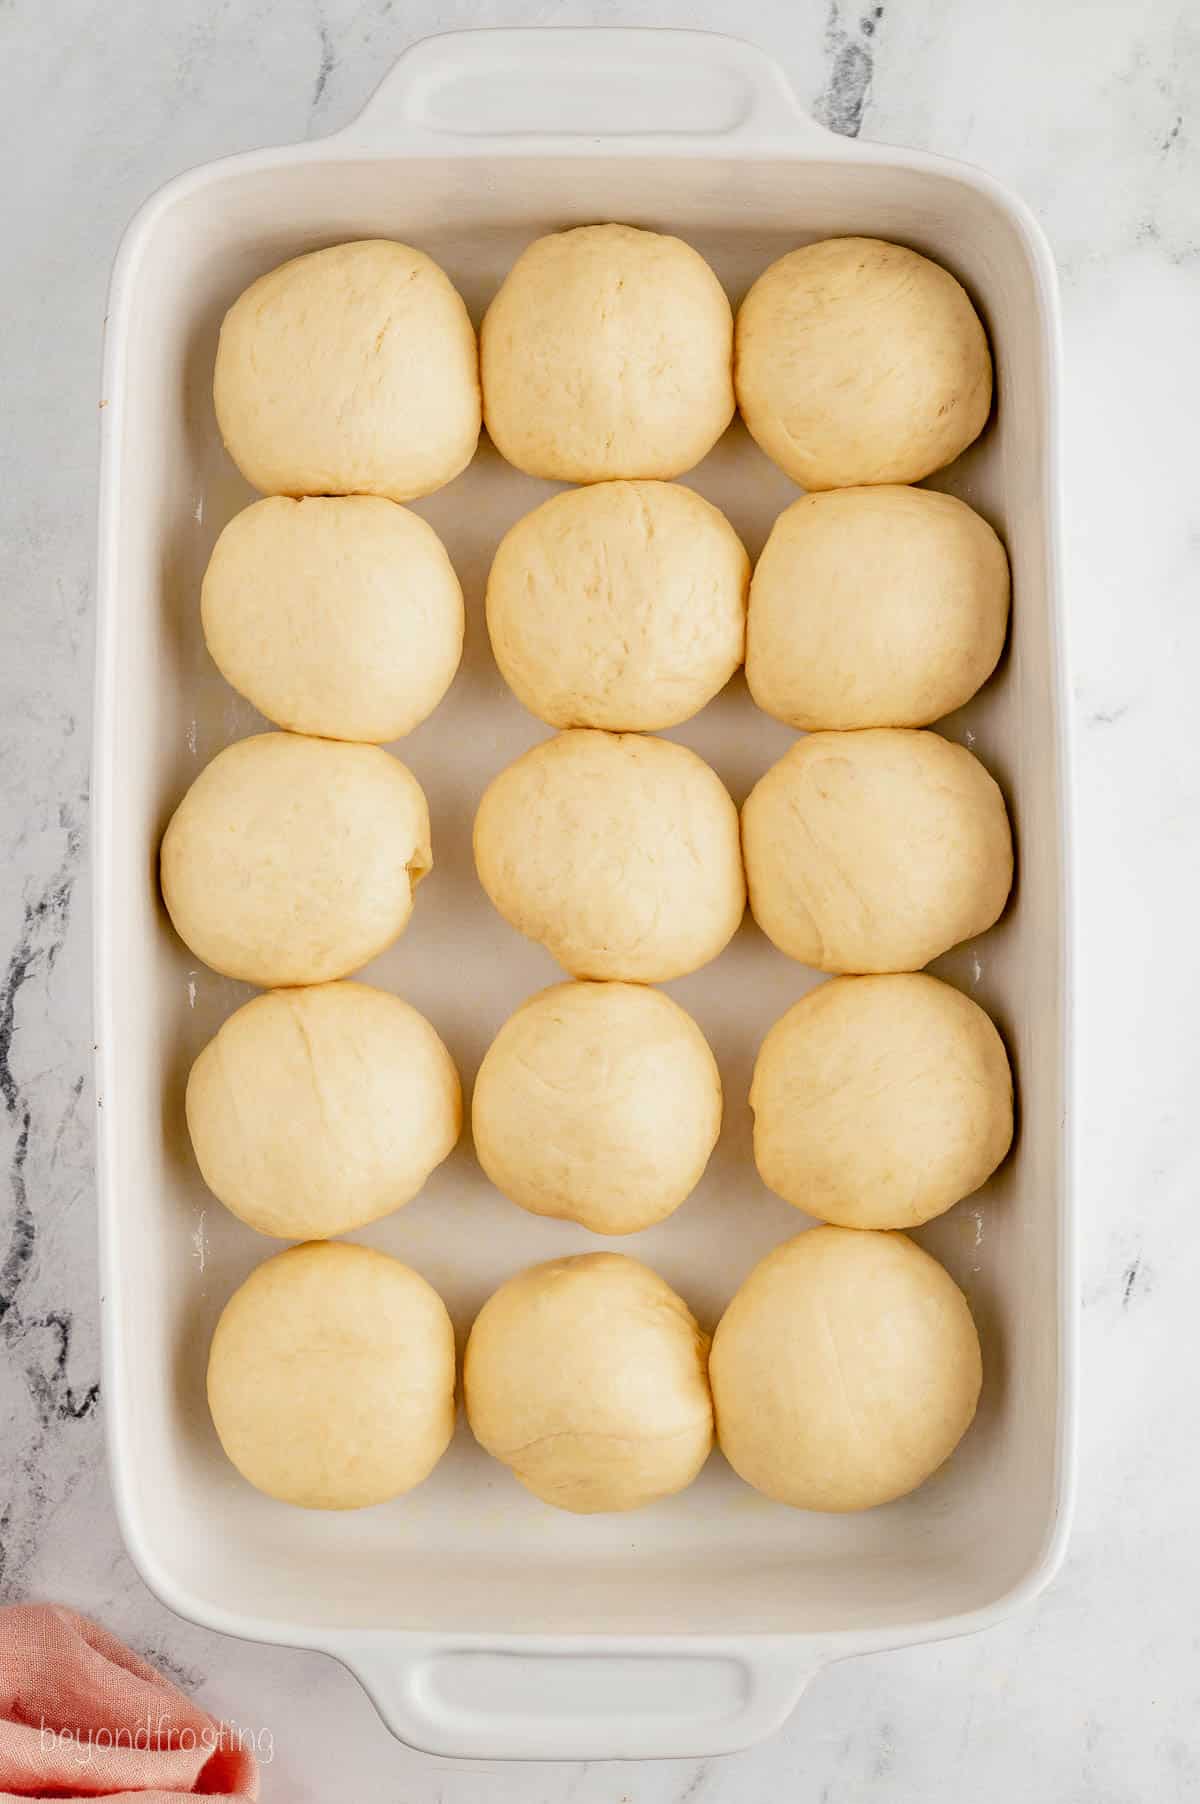 Dinner roll dough balls after the rise, arranged in a ceramic baking dish.